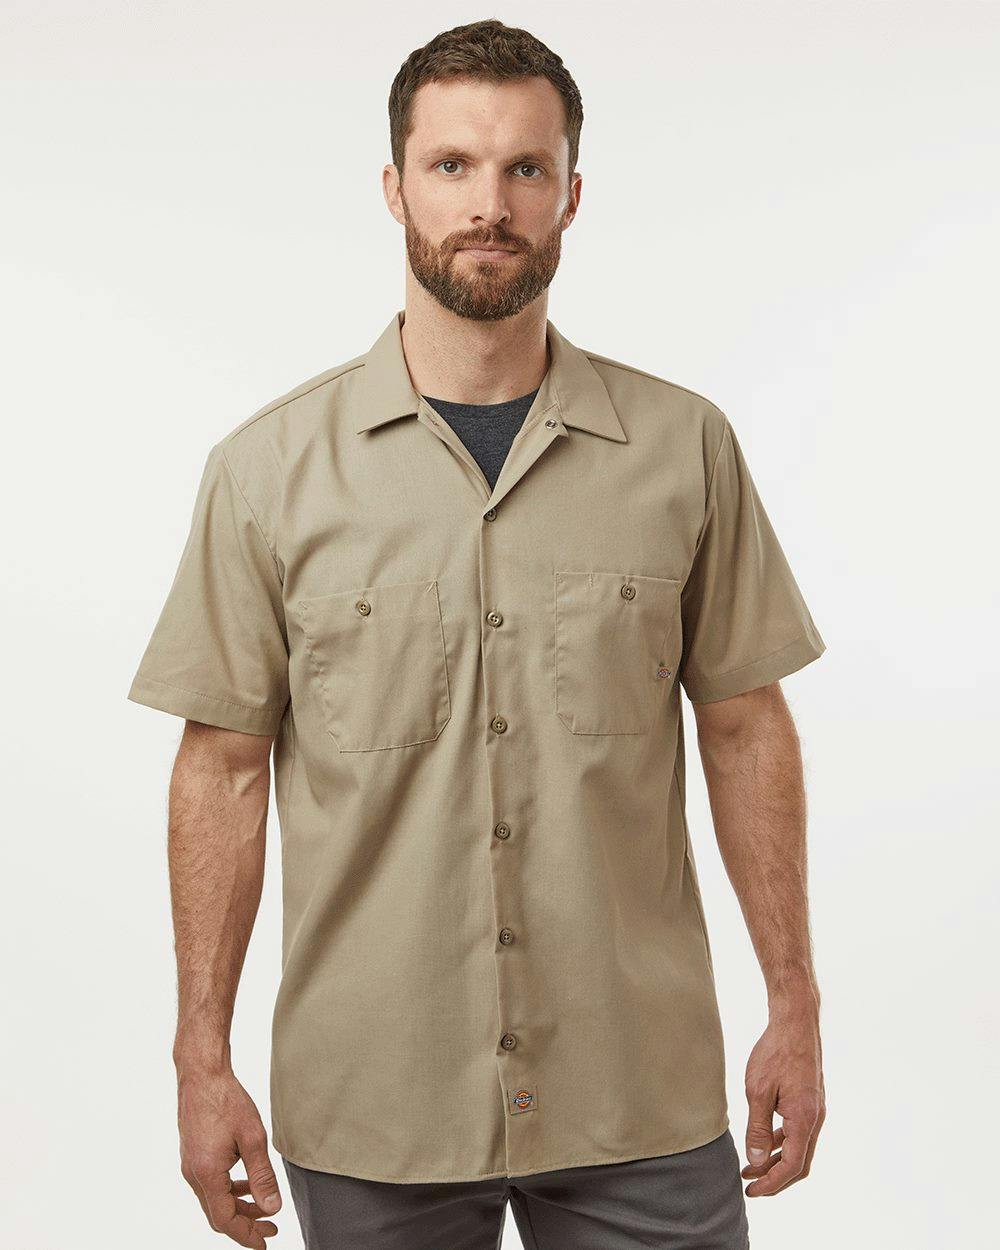 Image for Industrial Short Sleeve Work Shirt - S535